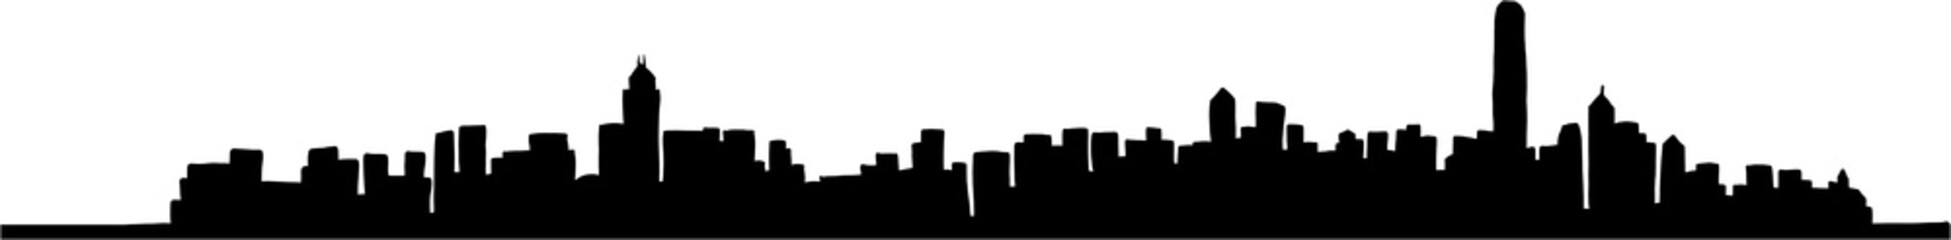 modern cityscape skyline silhouette doodle drawing